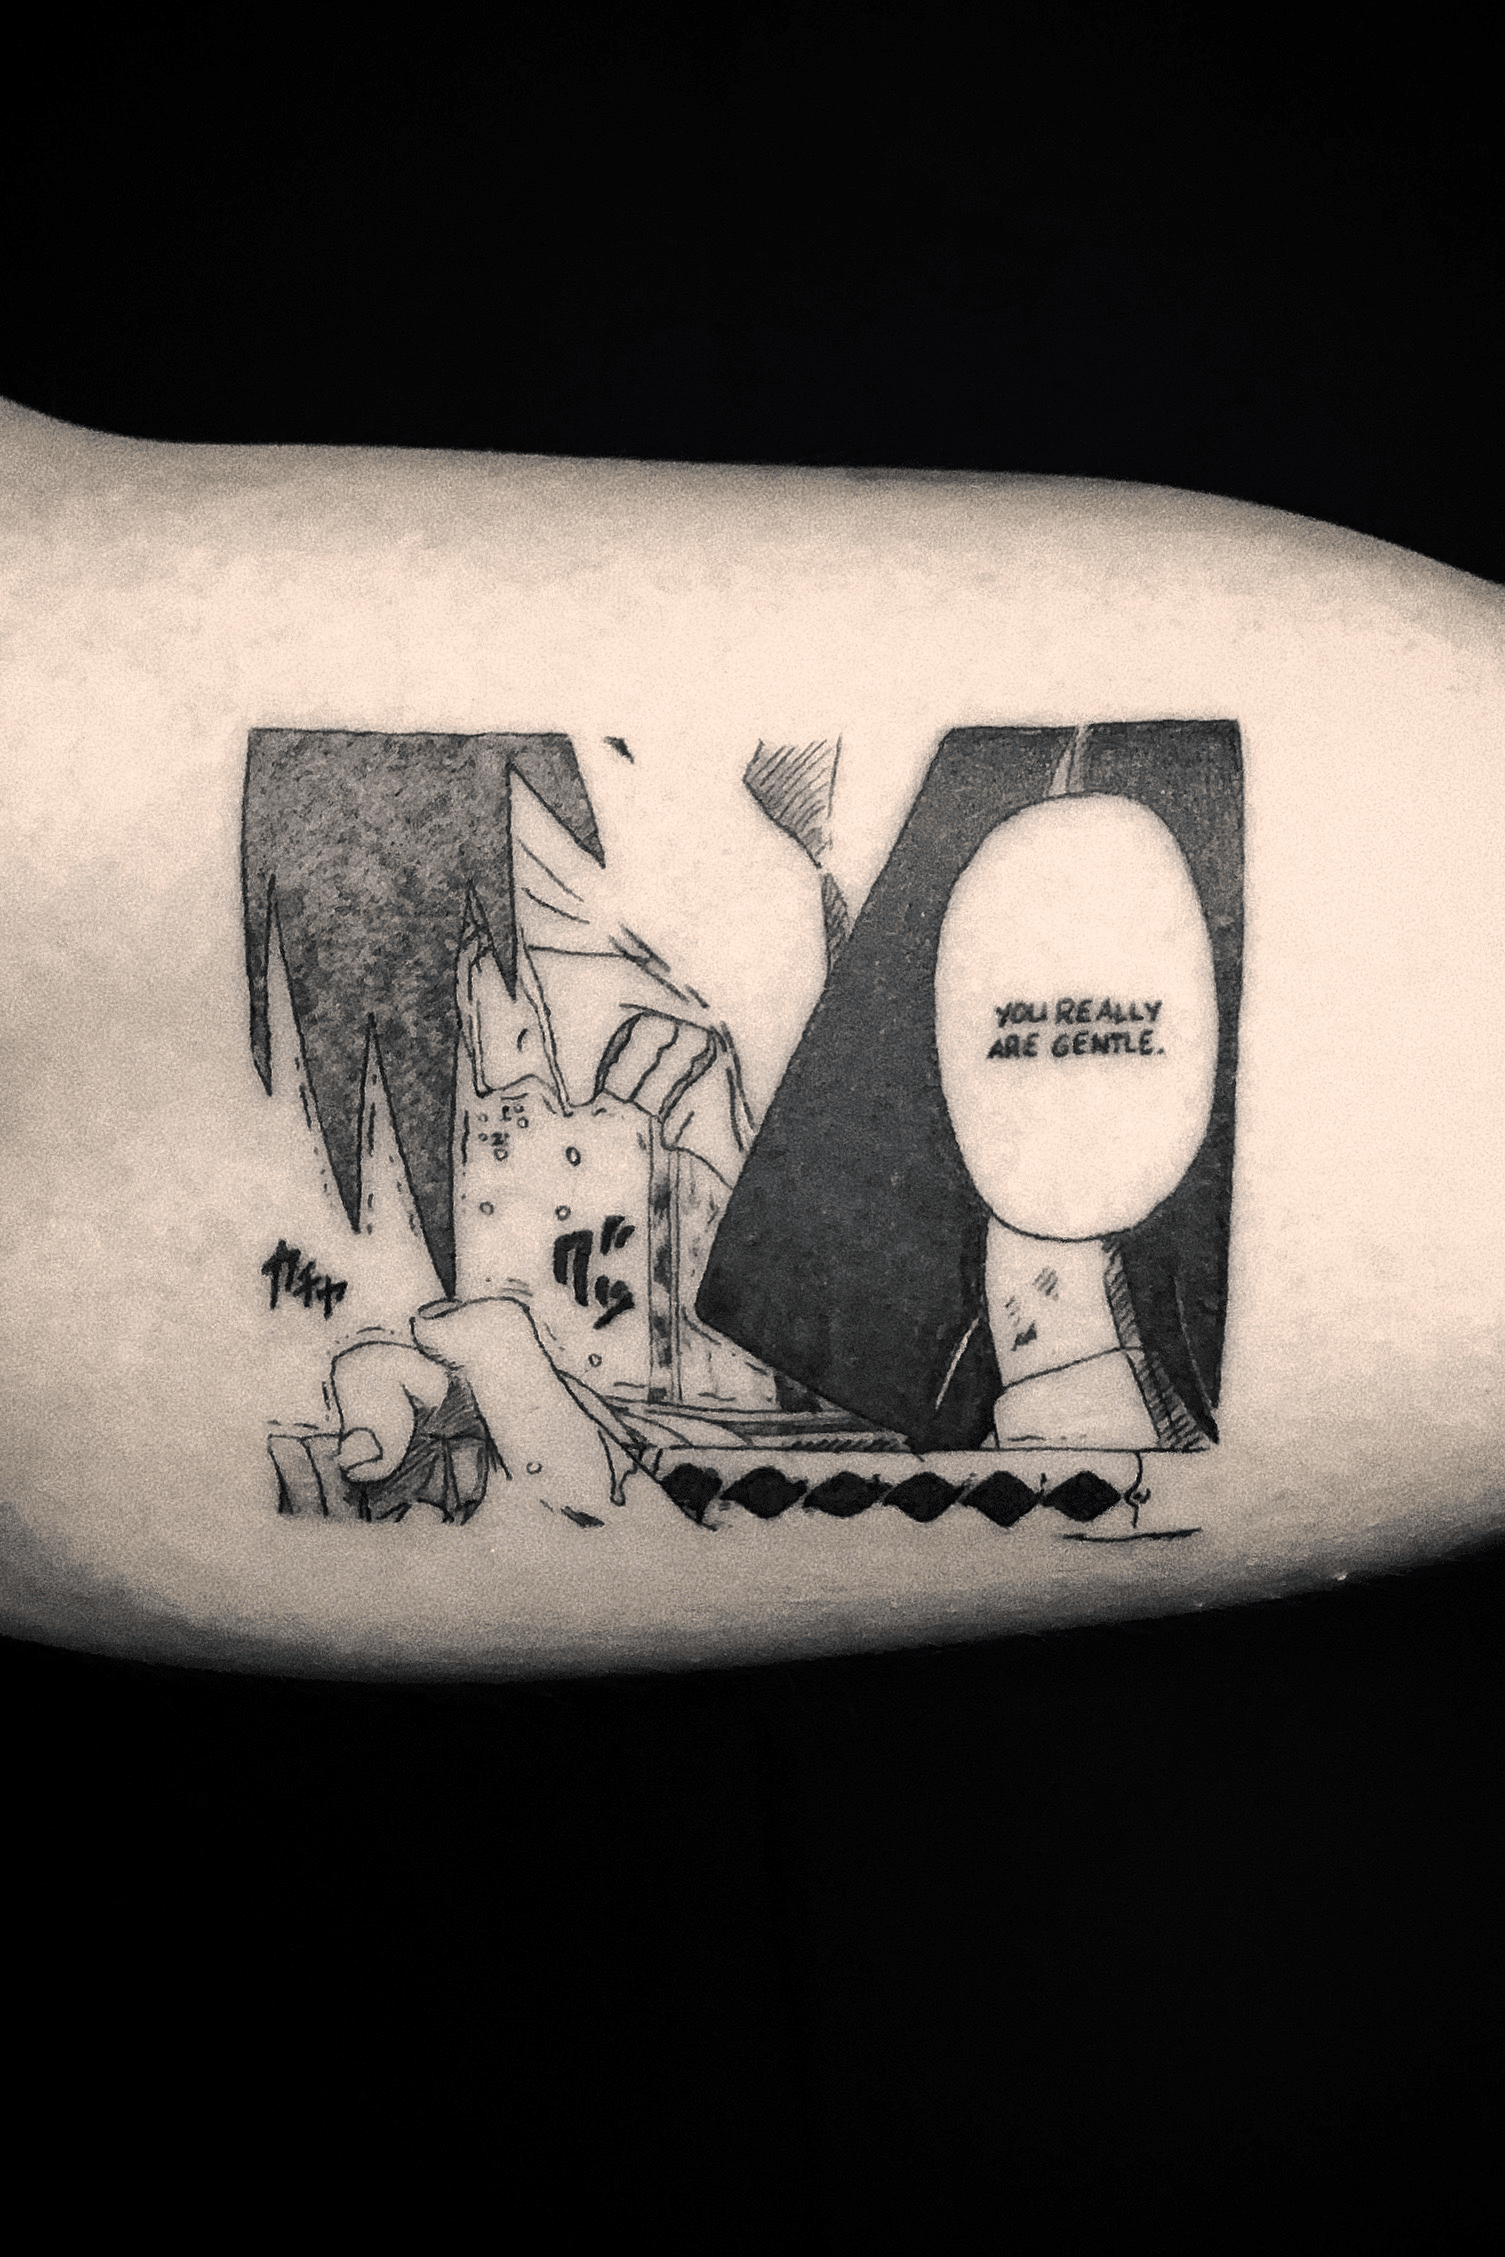 Elisa Baratta on X MANGA PANEL HALF SLEEVE Tattoo by me on Silvia Let me  know what you think milano milanotattoo italy italian manga mangpanel  mangatattoo anime animetattoo mangapaneltattoo blackwork tokyoghoul  naruto 